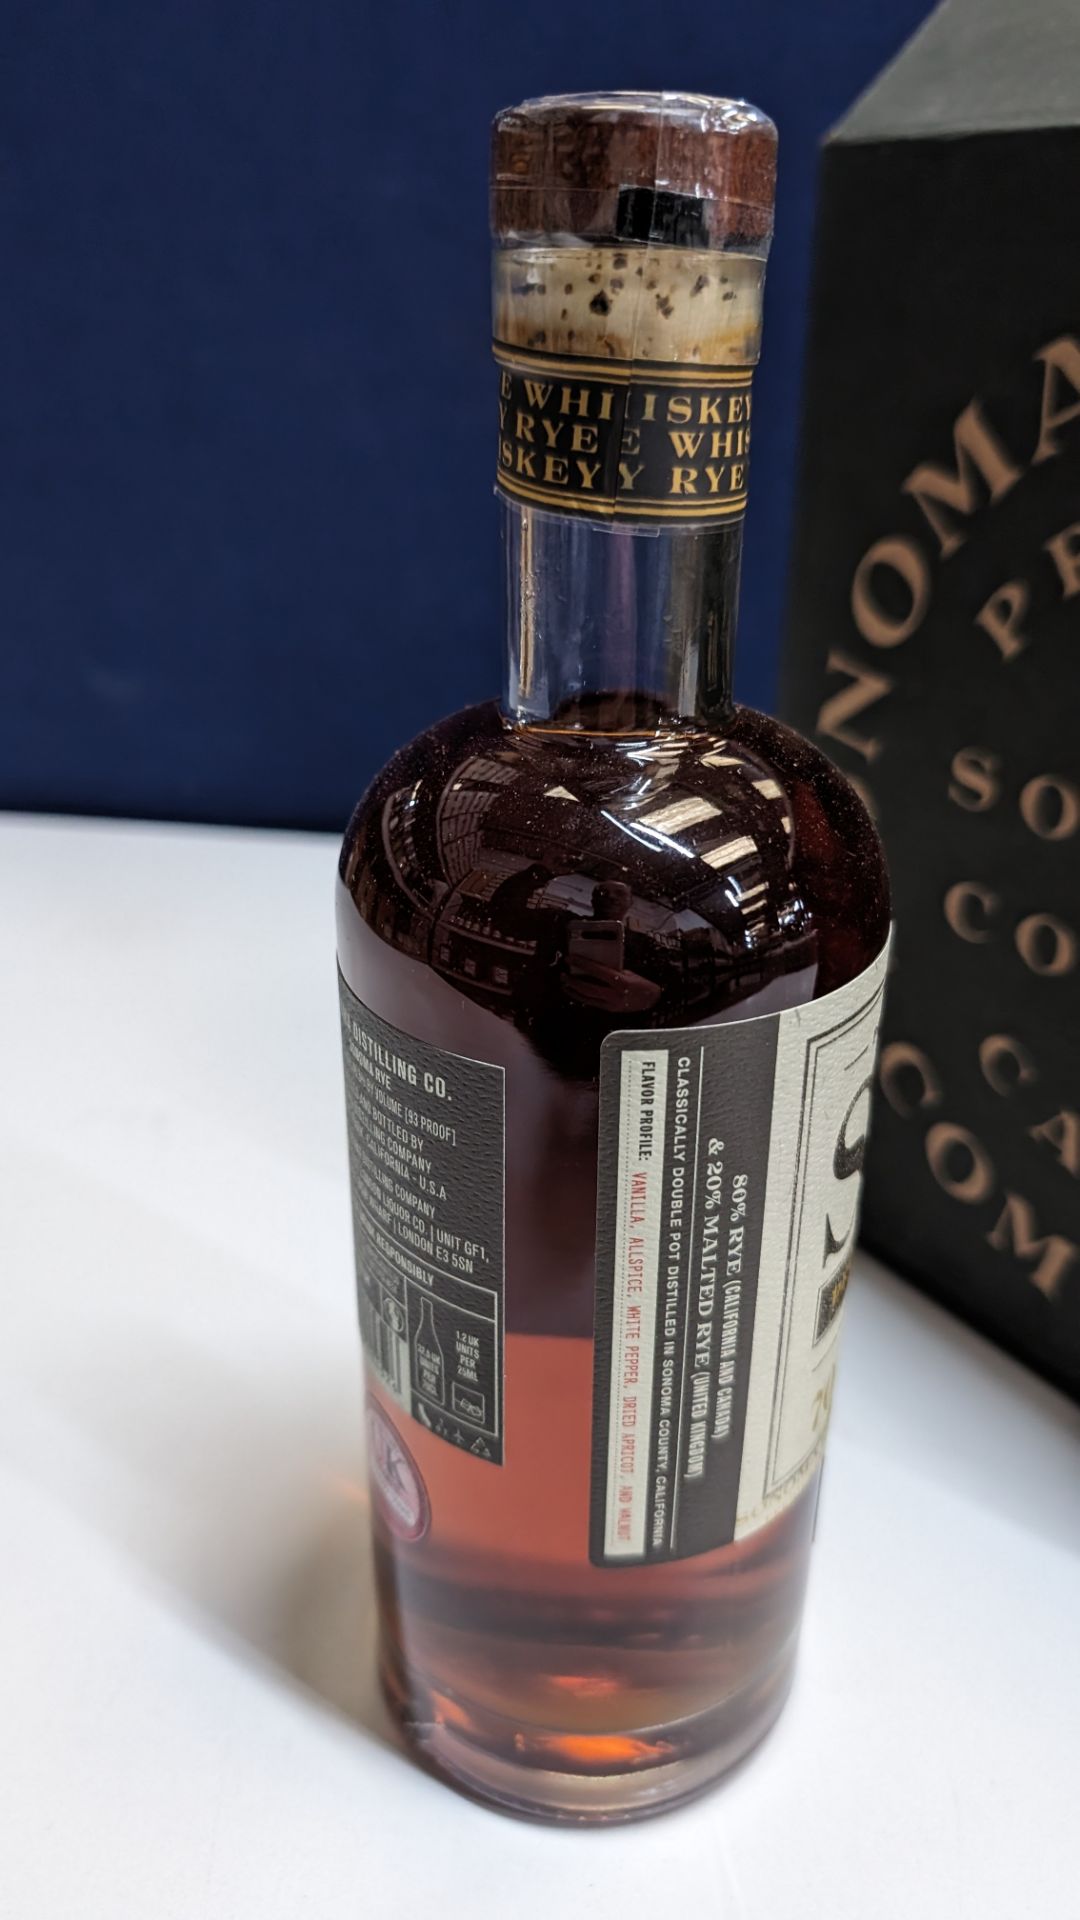 6 off 700ml bottles of Sonoma Rye Whiskey. In Sonoma branded box which includes bottling details on - Image 6 of 7